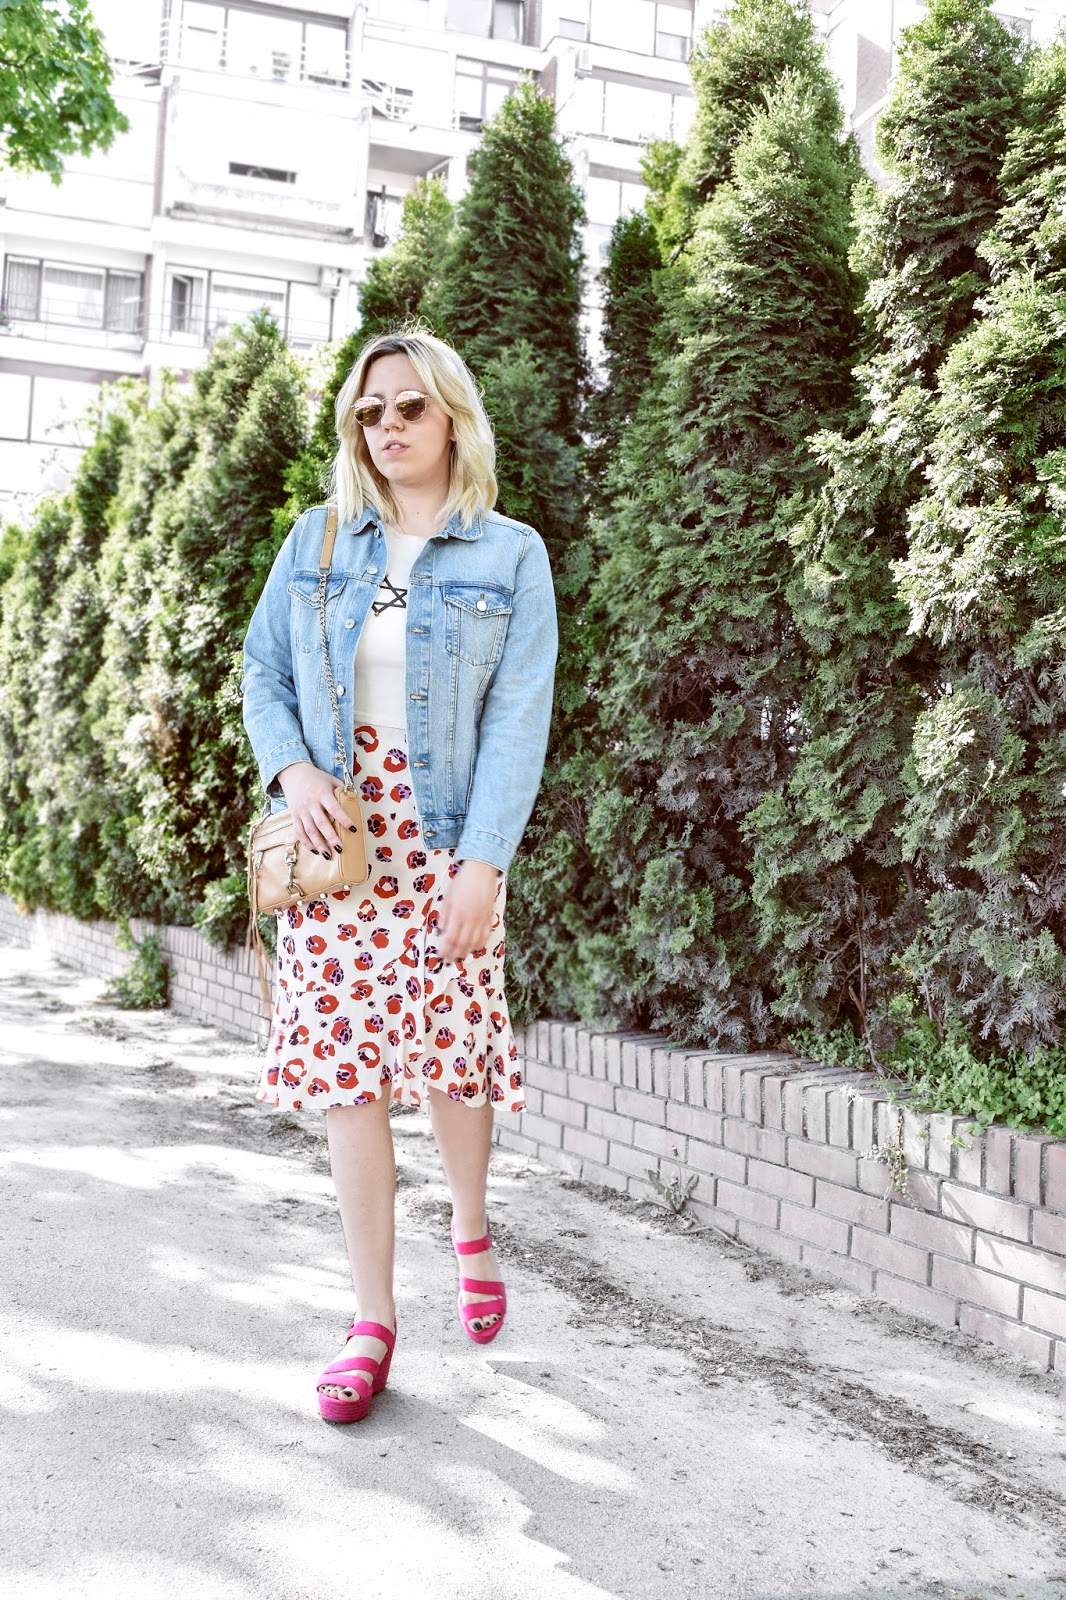 Floral midi skirt and denim jacket outfit